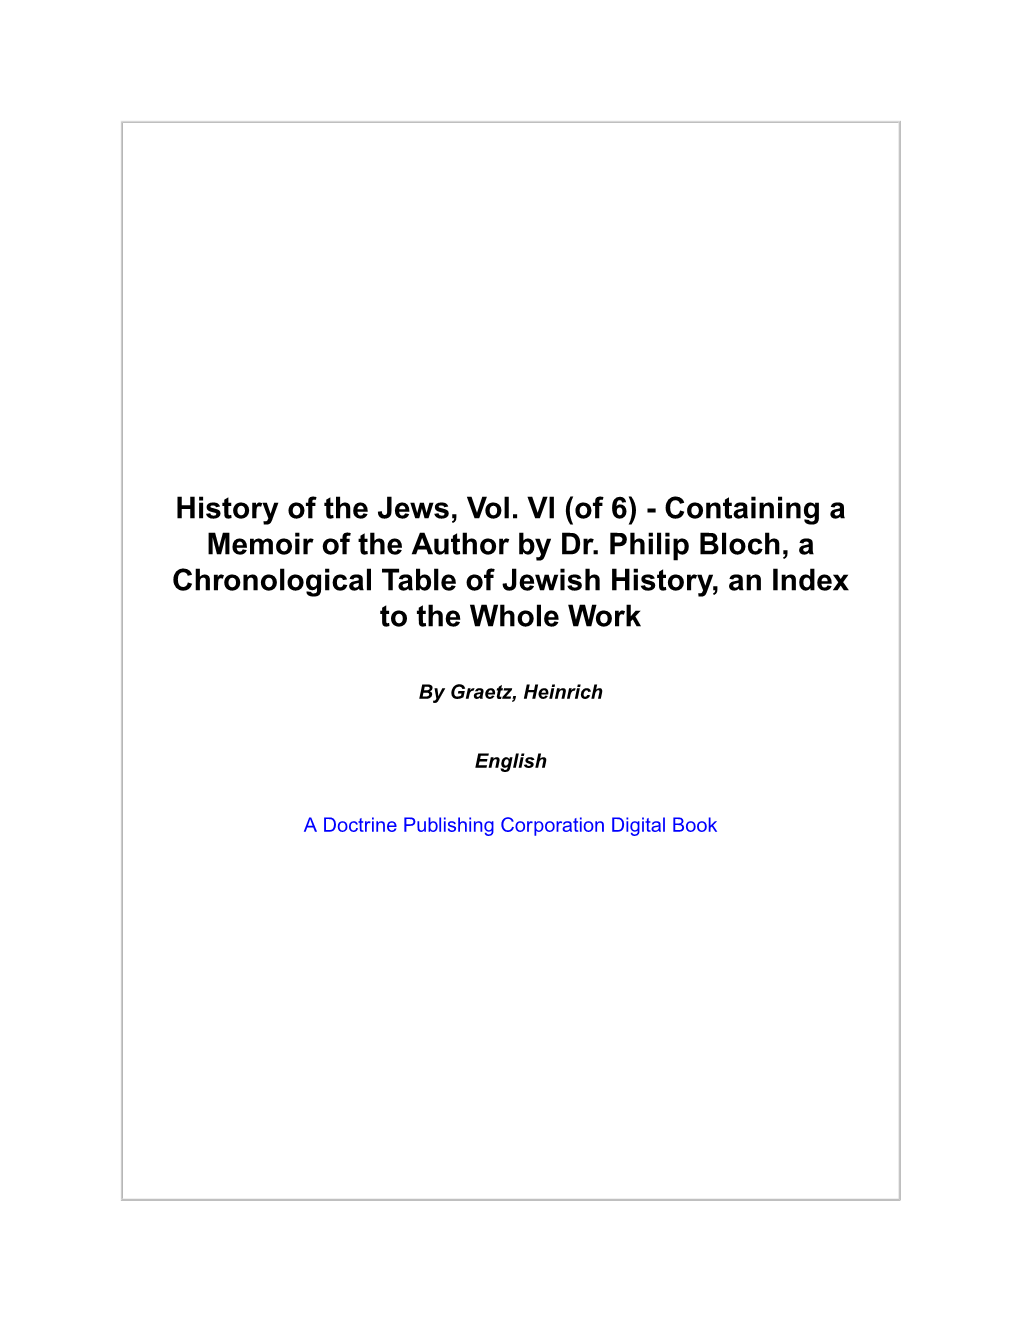 History of the Jews, Vol. VI (Of 6) - Containing a Memoir of the Author by Dr